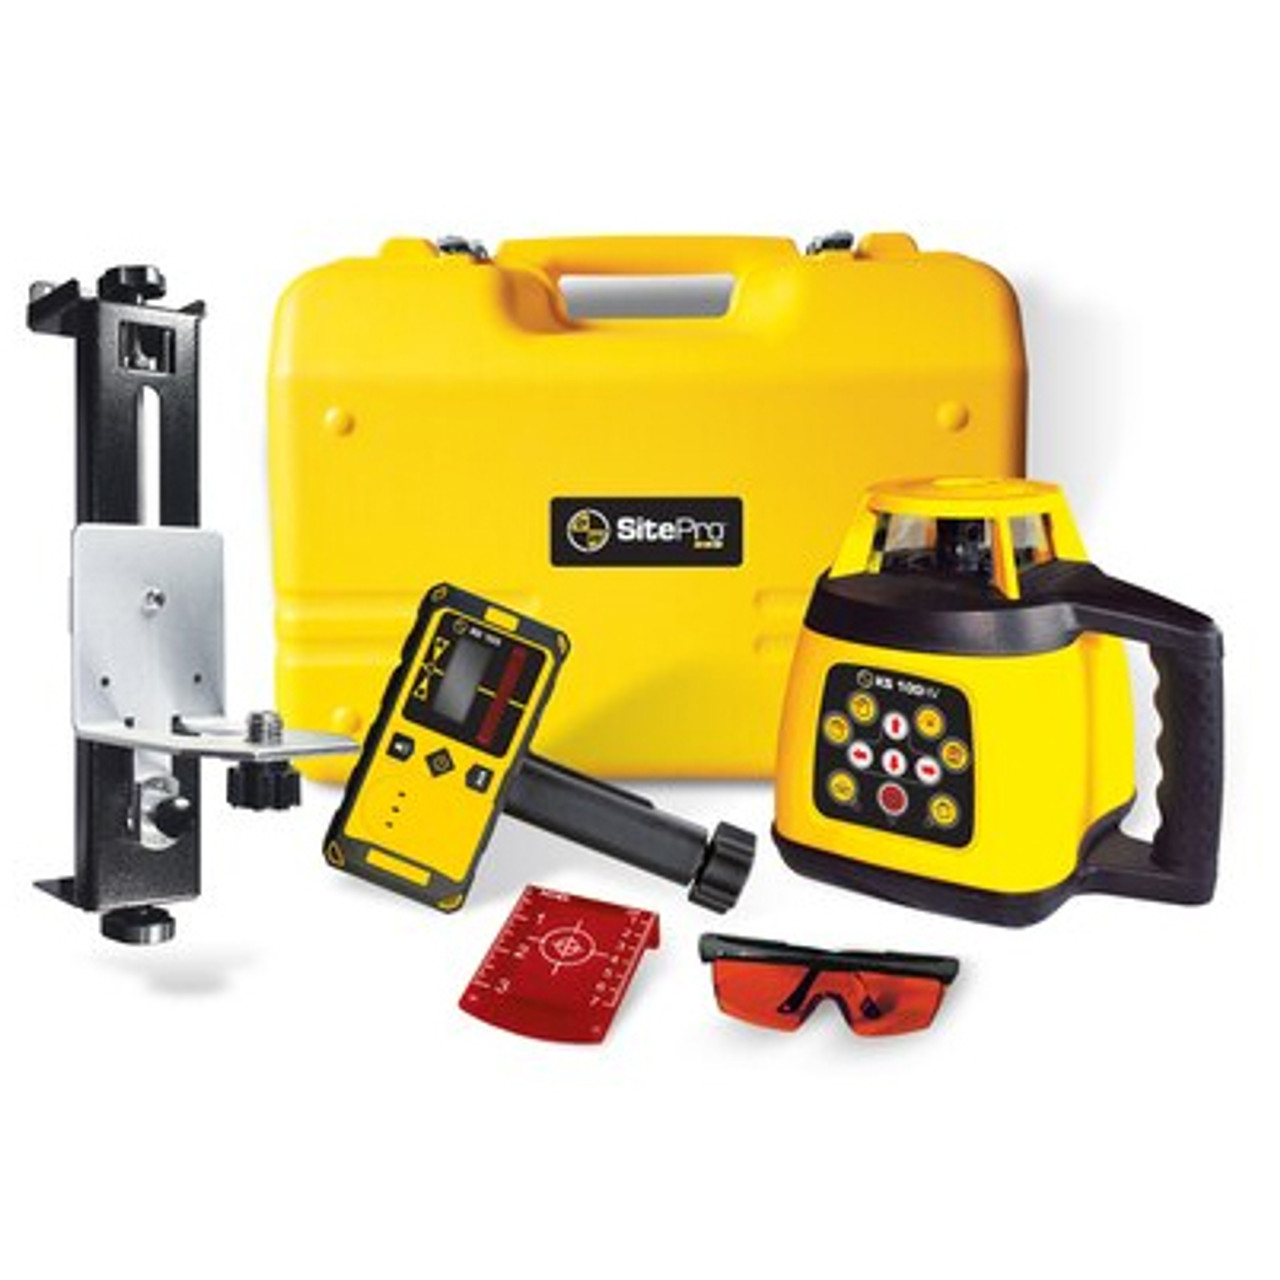 6pc MICRO-LINE PRECISION LASER LEVEL KIT WITH TRIPOD MADE BY MICHIGAN  INDUSTRIAL